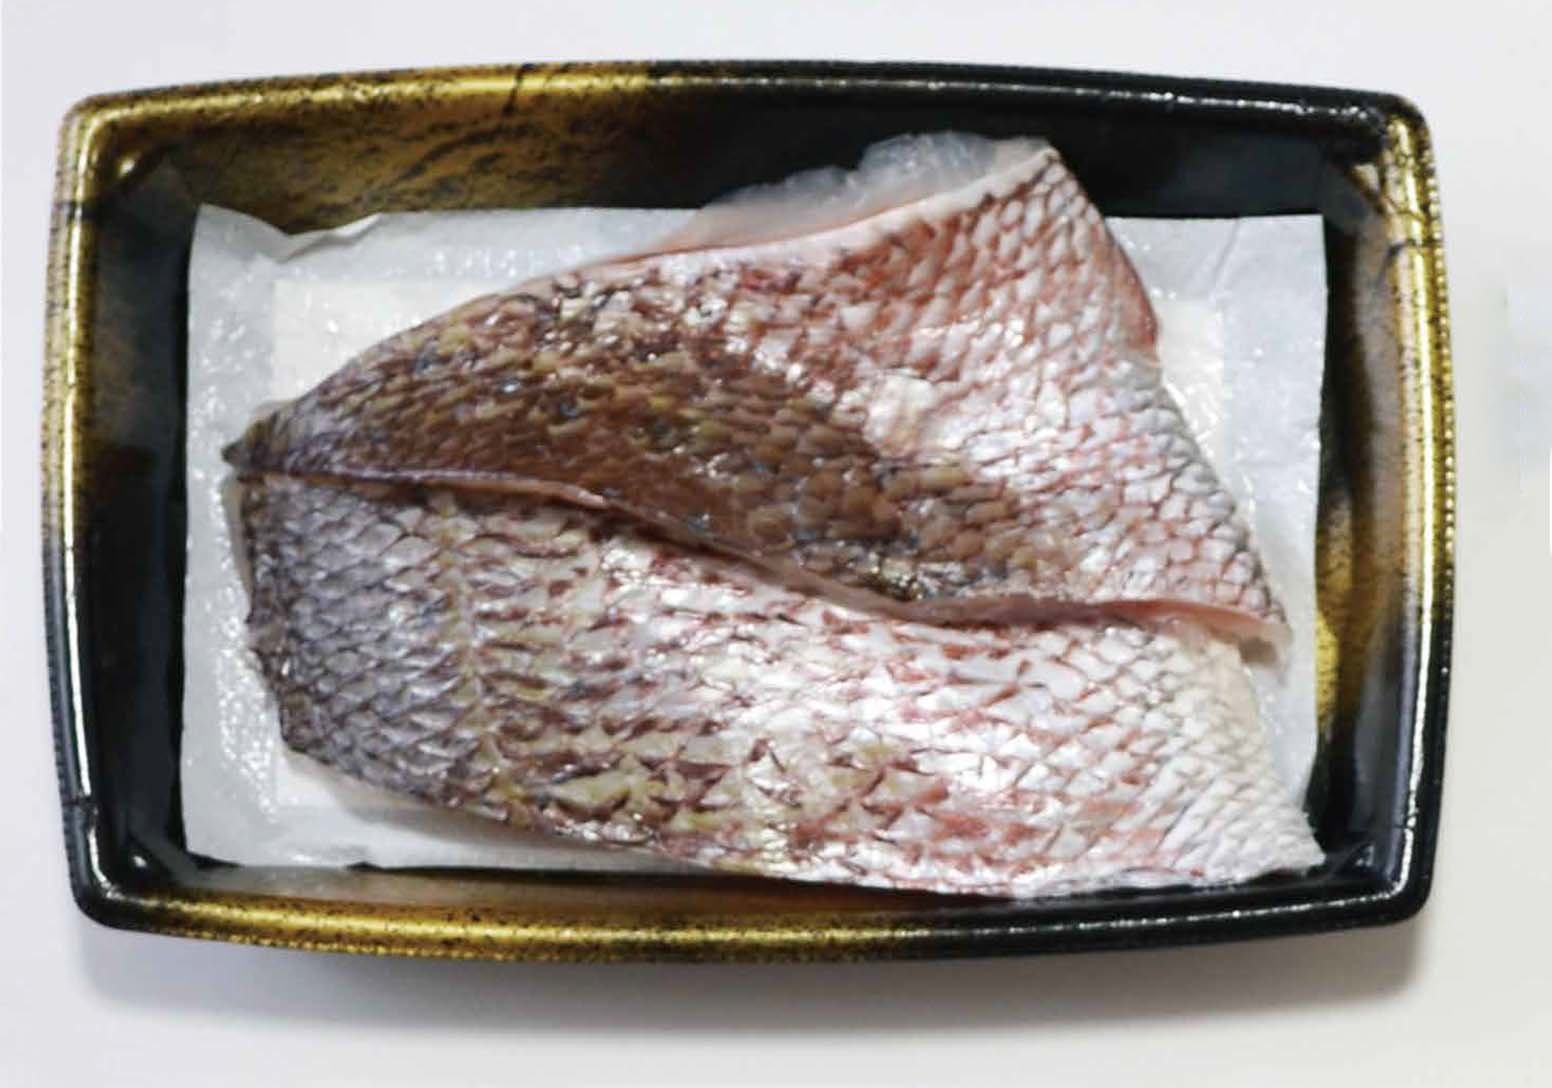 Demi online food absorbent pad to absorb excess oil for cut fish fillets